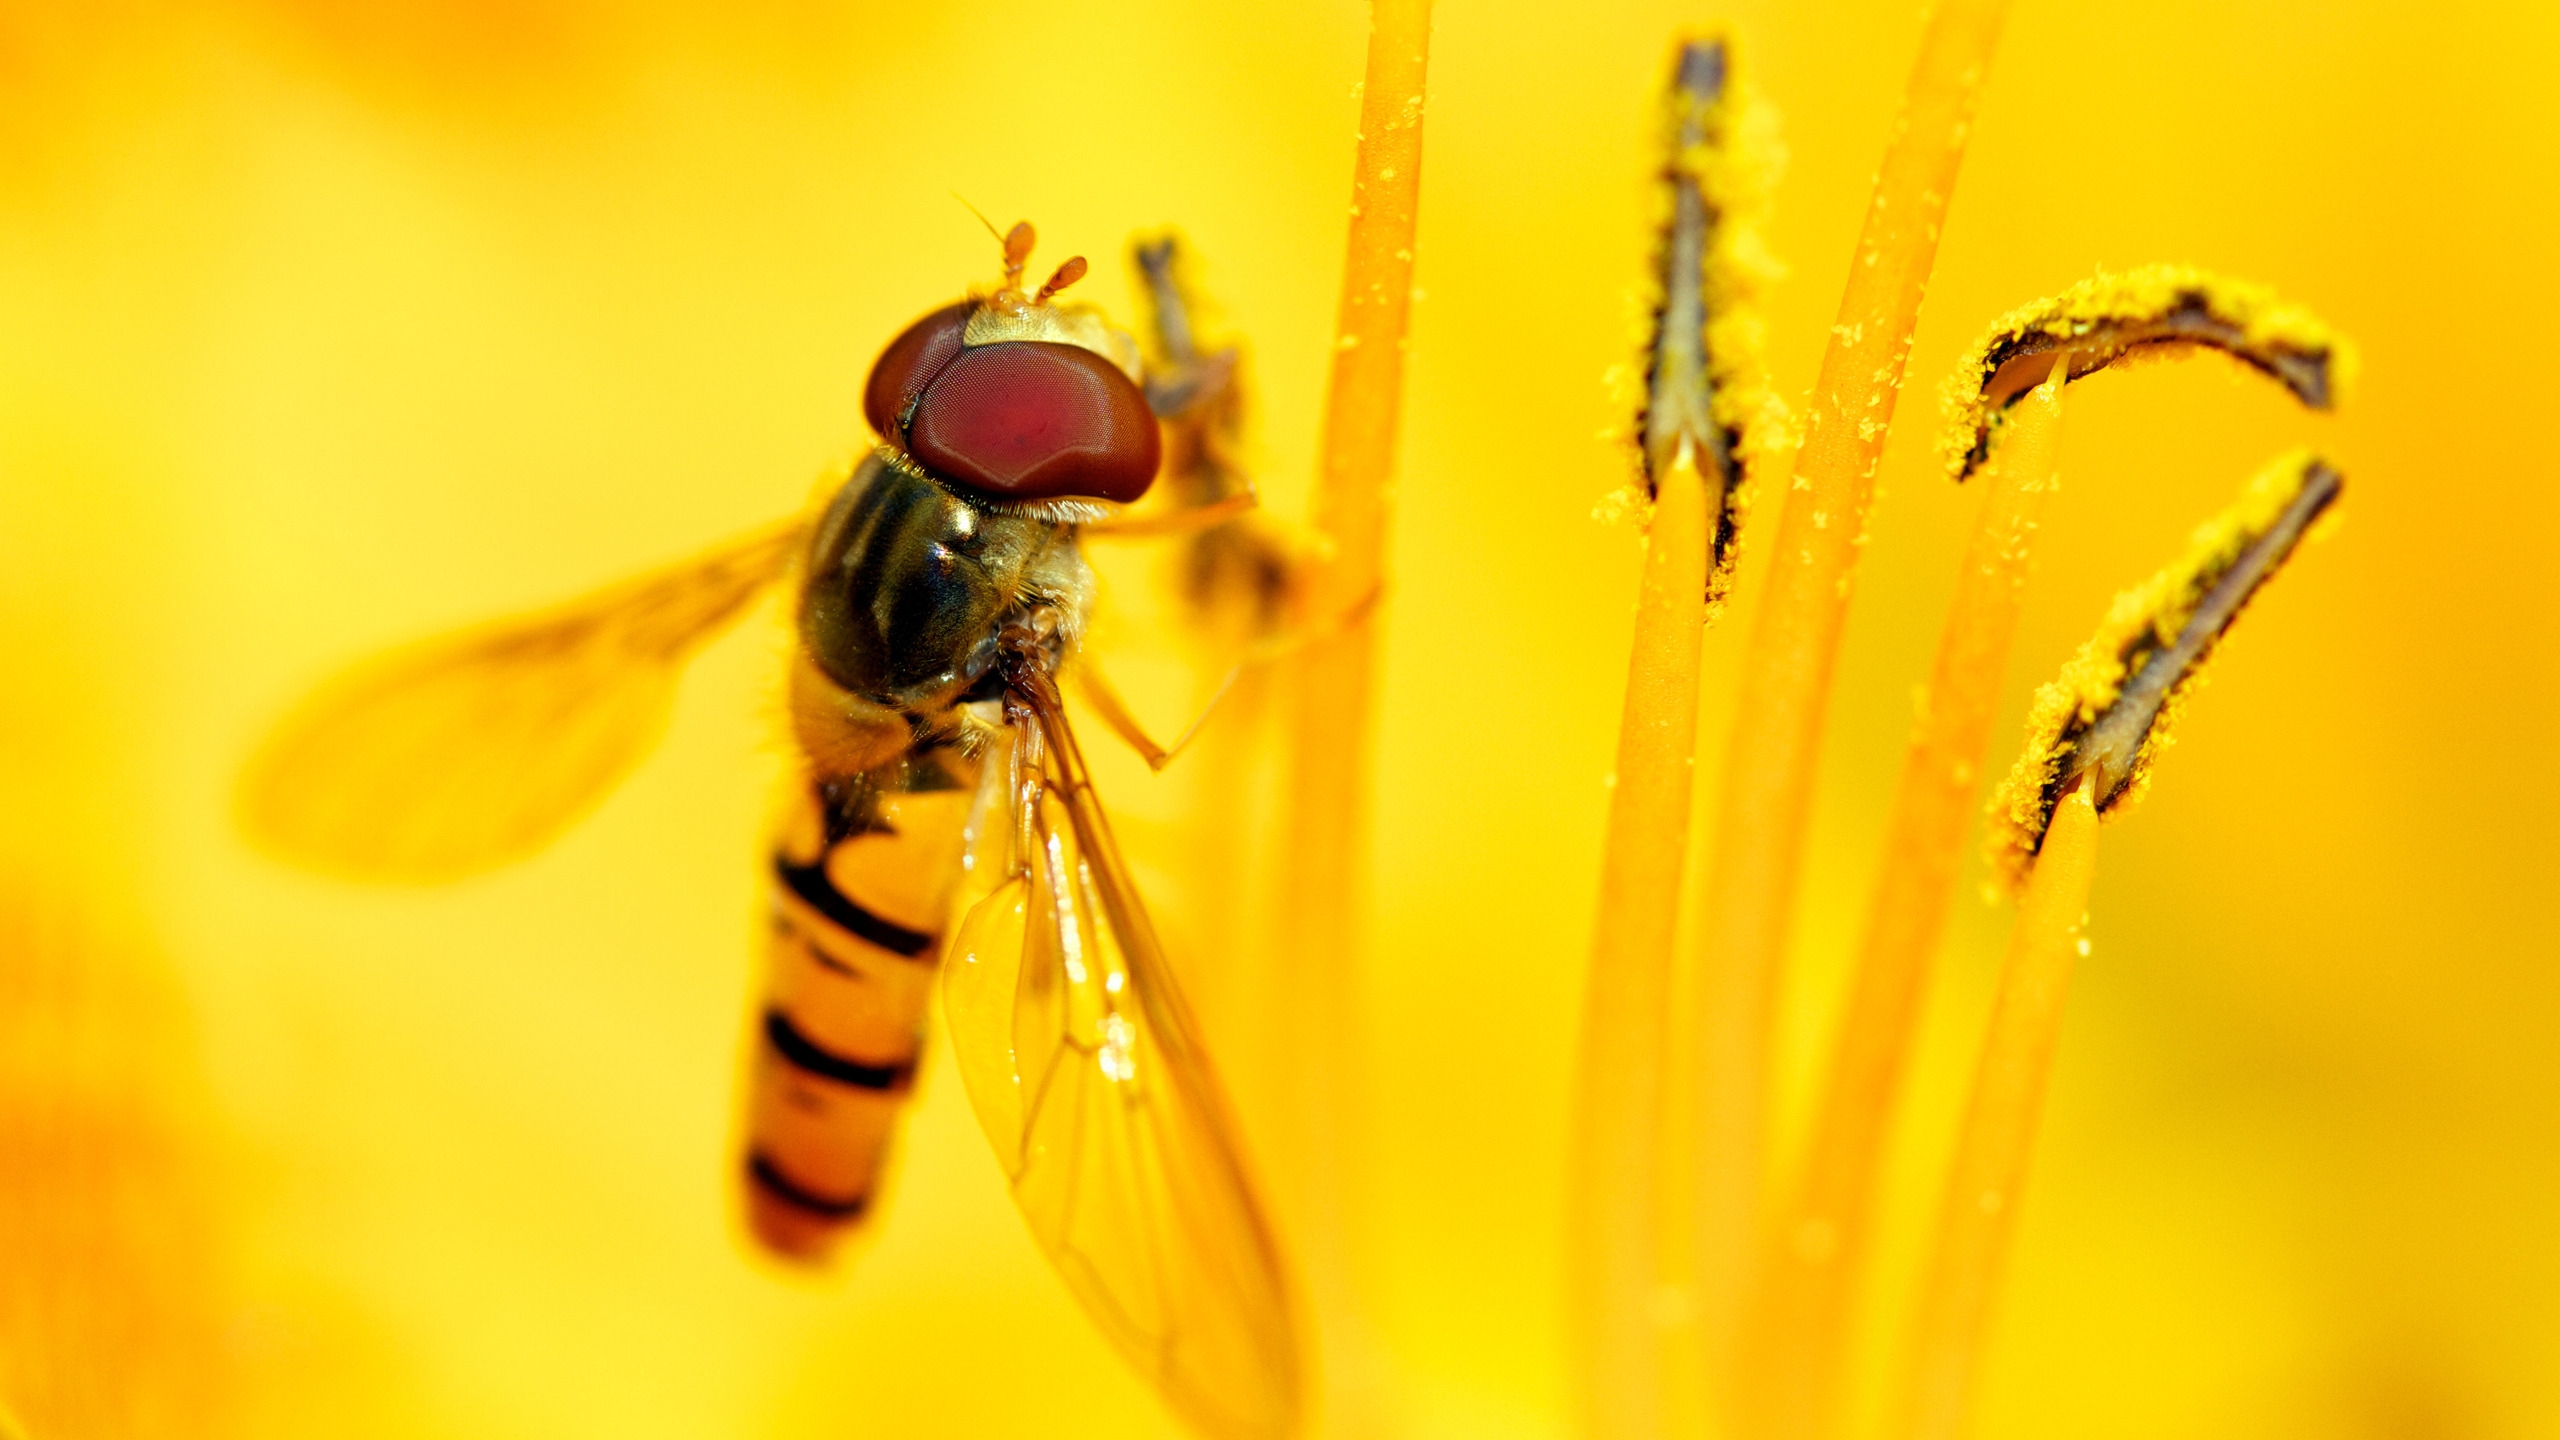 Syrphid\'s Feast for 2560x1440 HDTV resolution